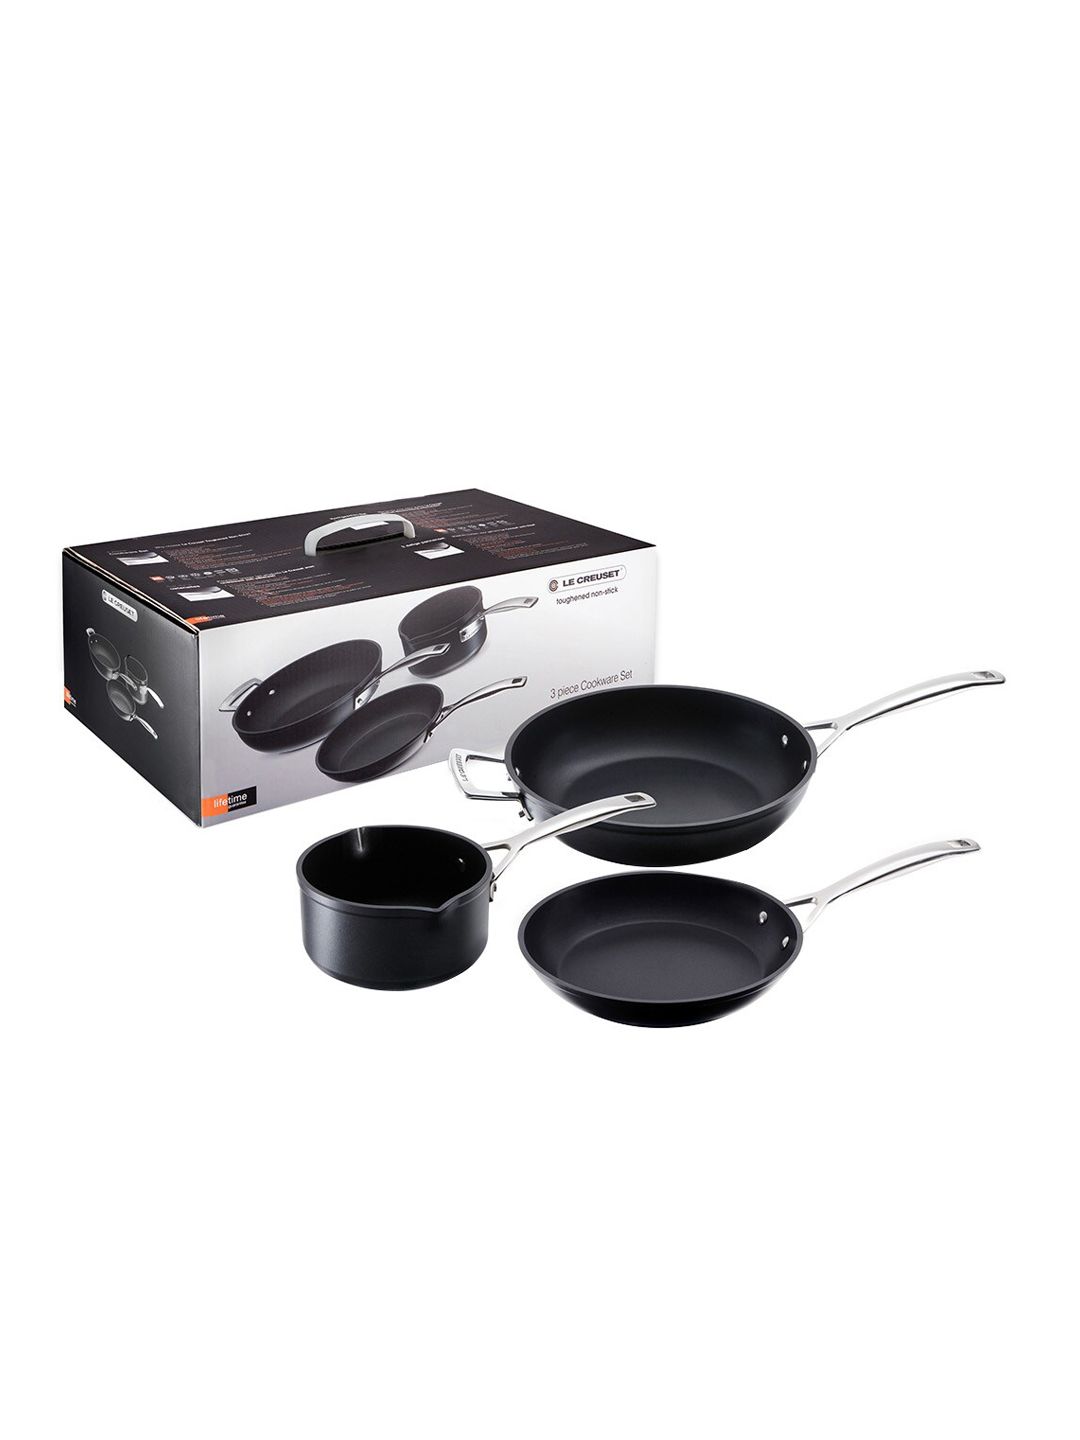 LE CREUSET Set Of 3 Black & Silver-Toned Cookware Set Price in India